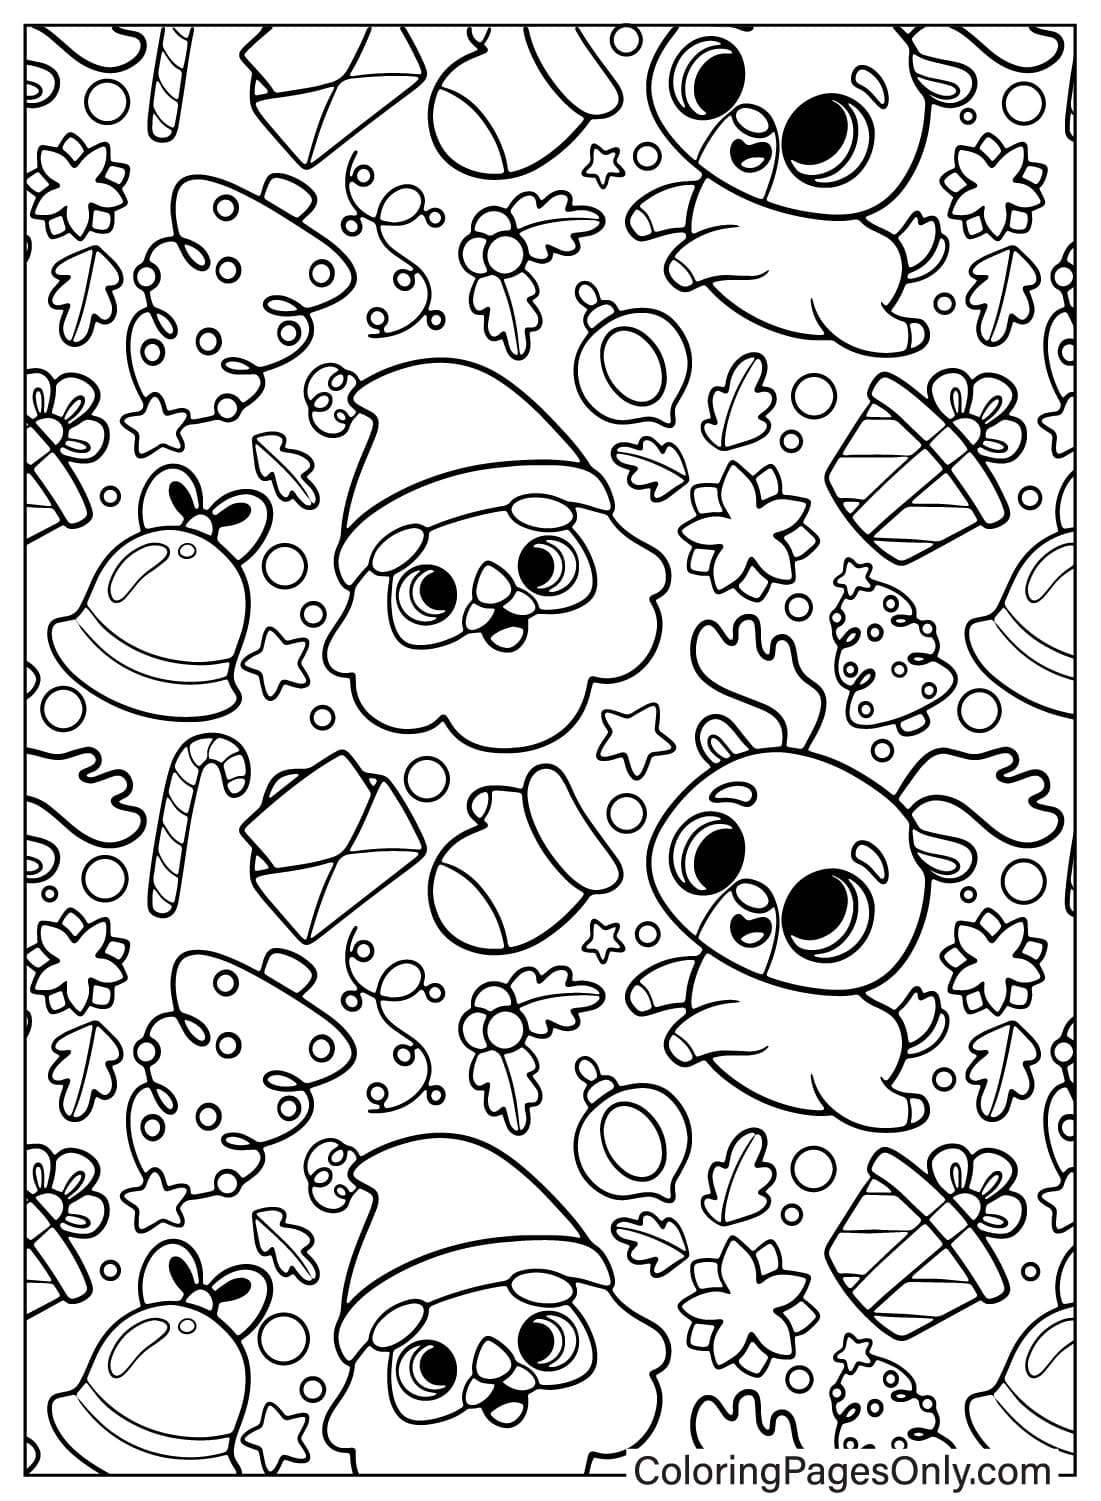 Free Printable Christmas Pattern Coloring Page from Christmas Pattern